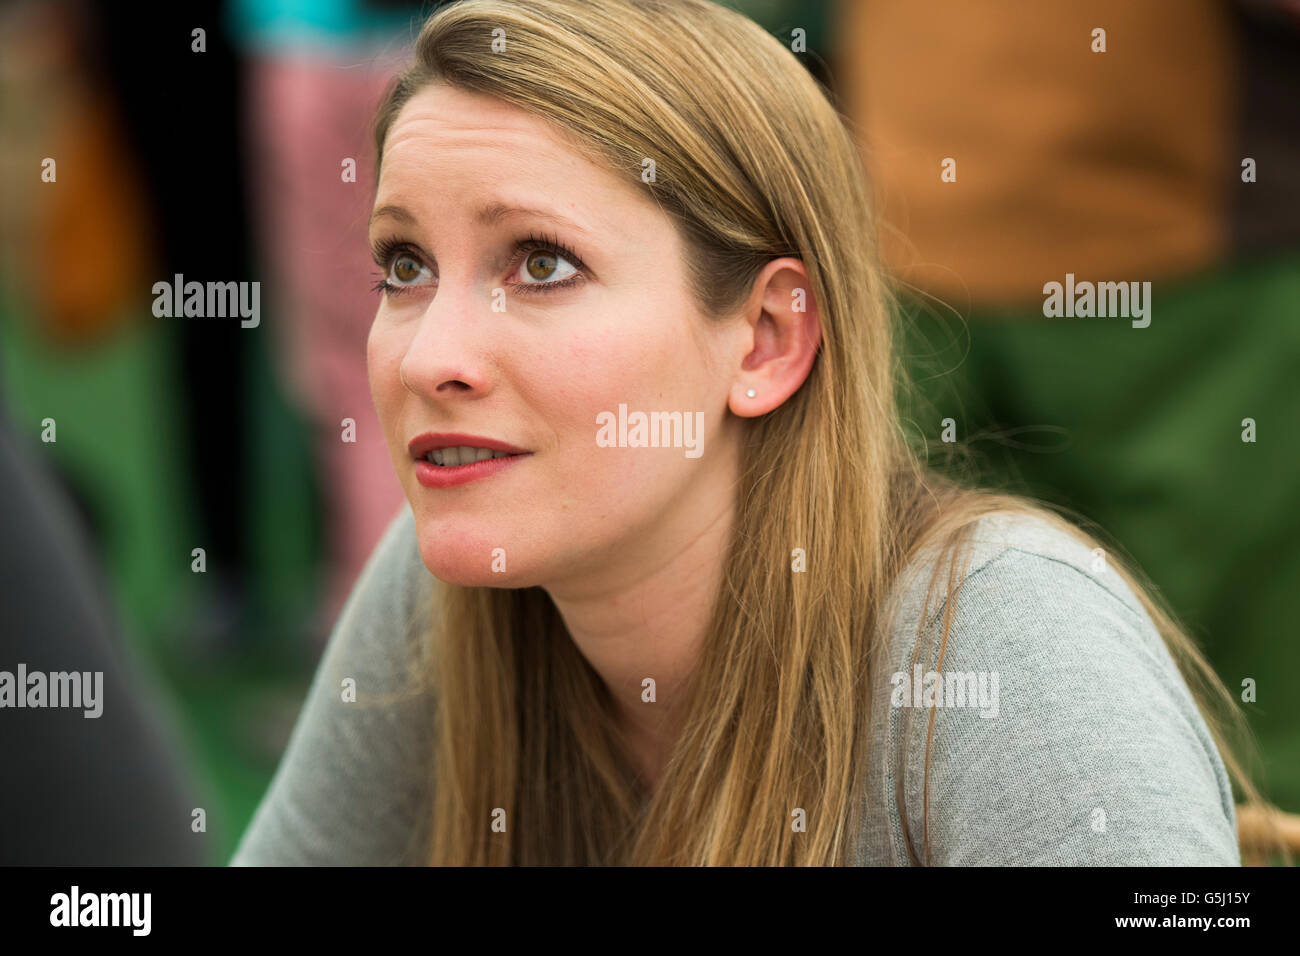 Laura Bates: British feminist writer. She founded the Everyday Sexism Project website in April 2012. Her first book, Everyday Sexism, was published in 2014  The Hay Festival of Literature and the Arts, Hay on Wye, Powys, Wales UK, June 03 2016 Stock Photo